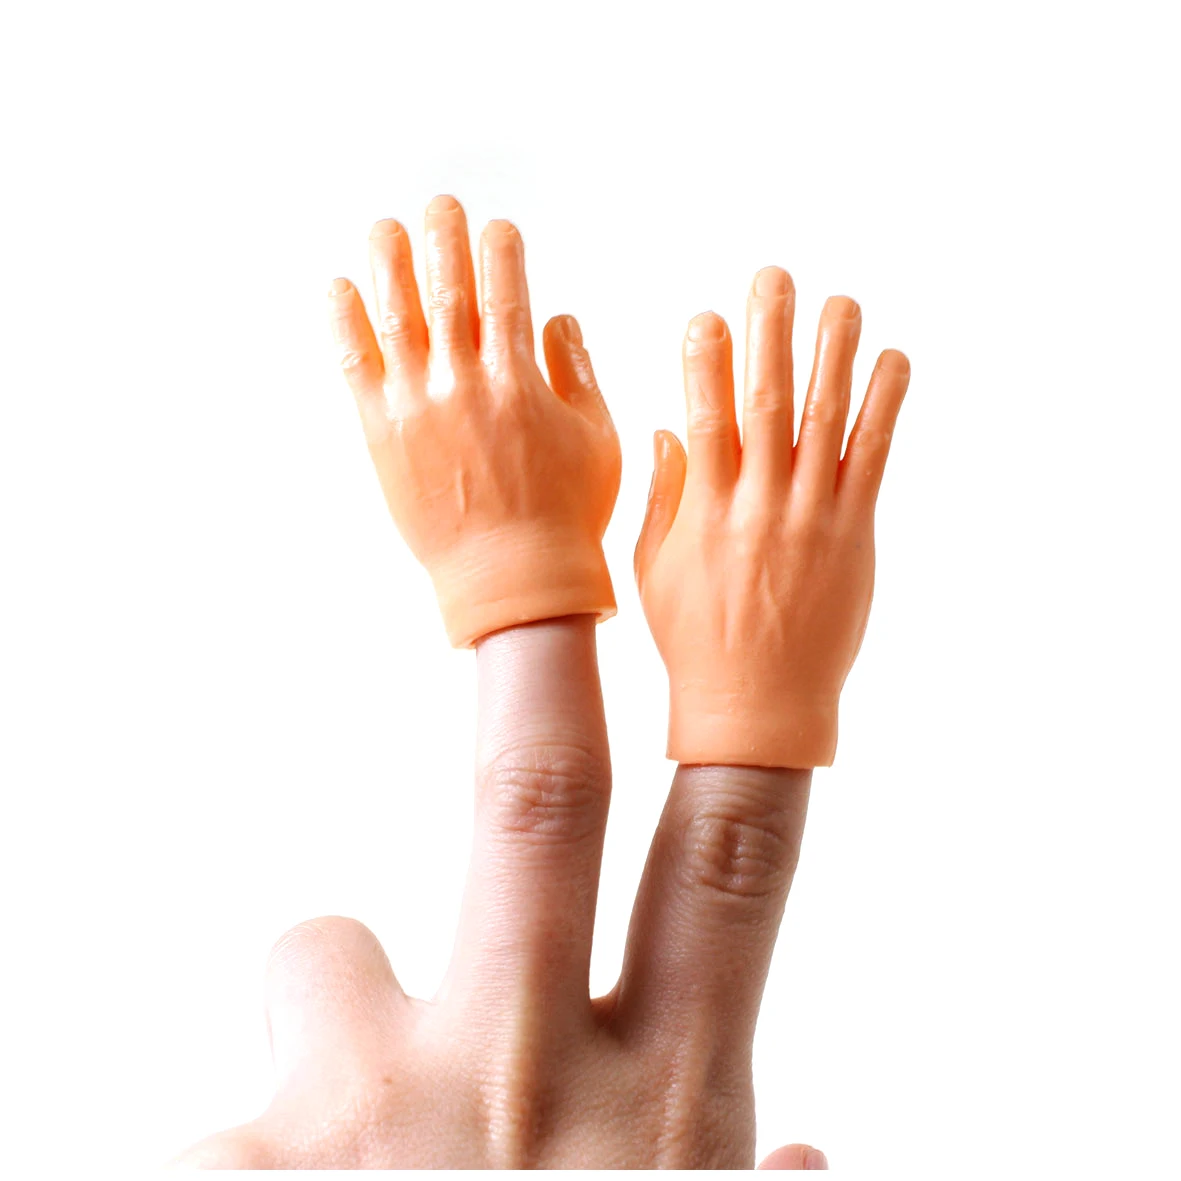 
Set of 10pcs Left or Right Tiny Hands Toy Finger Hands Finger Puppets  (60732128366)